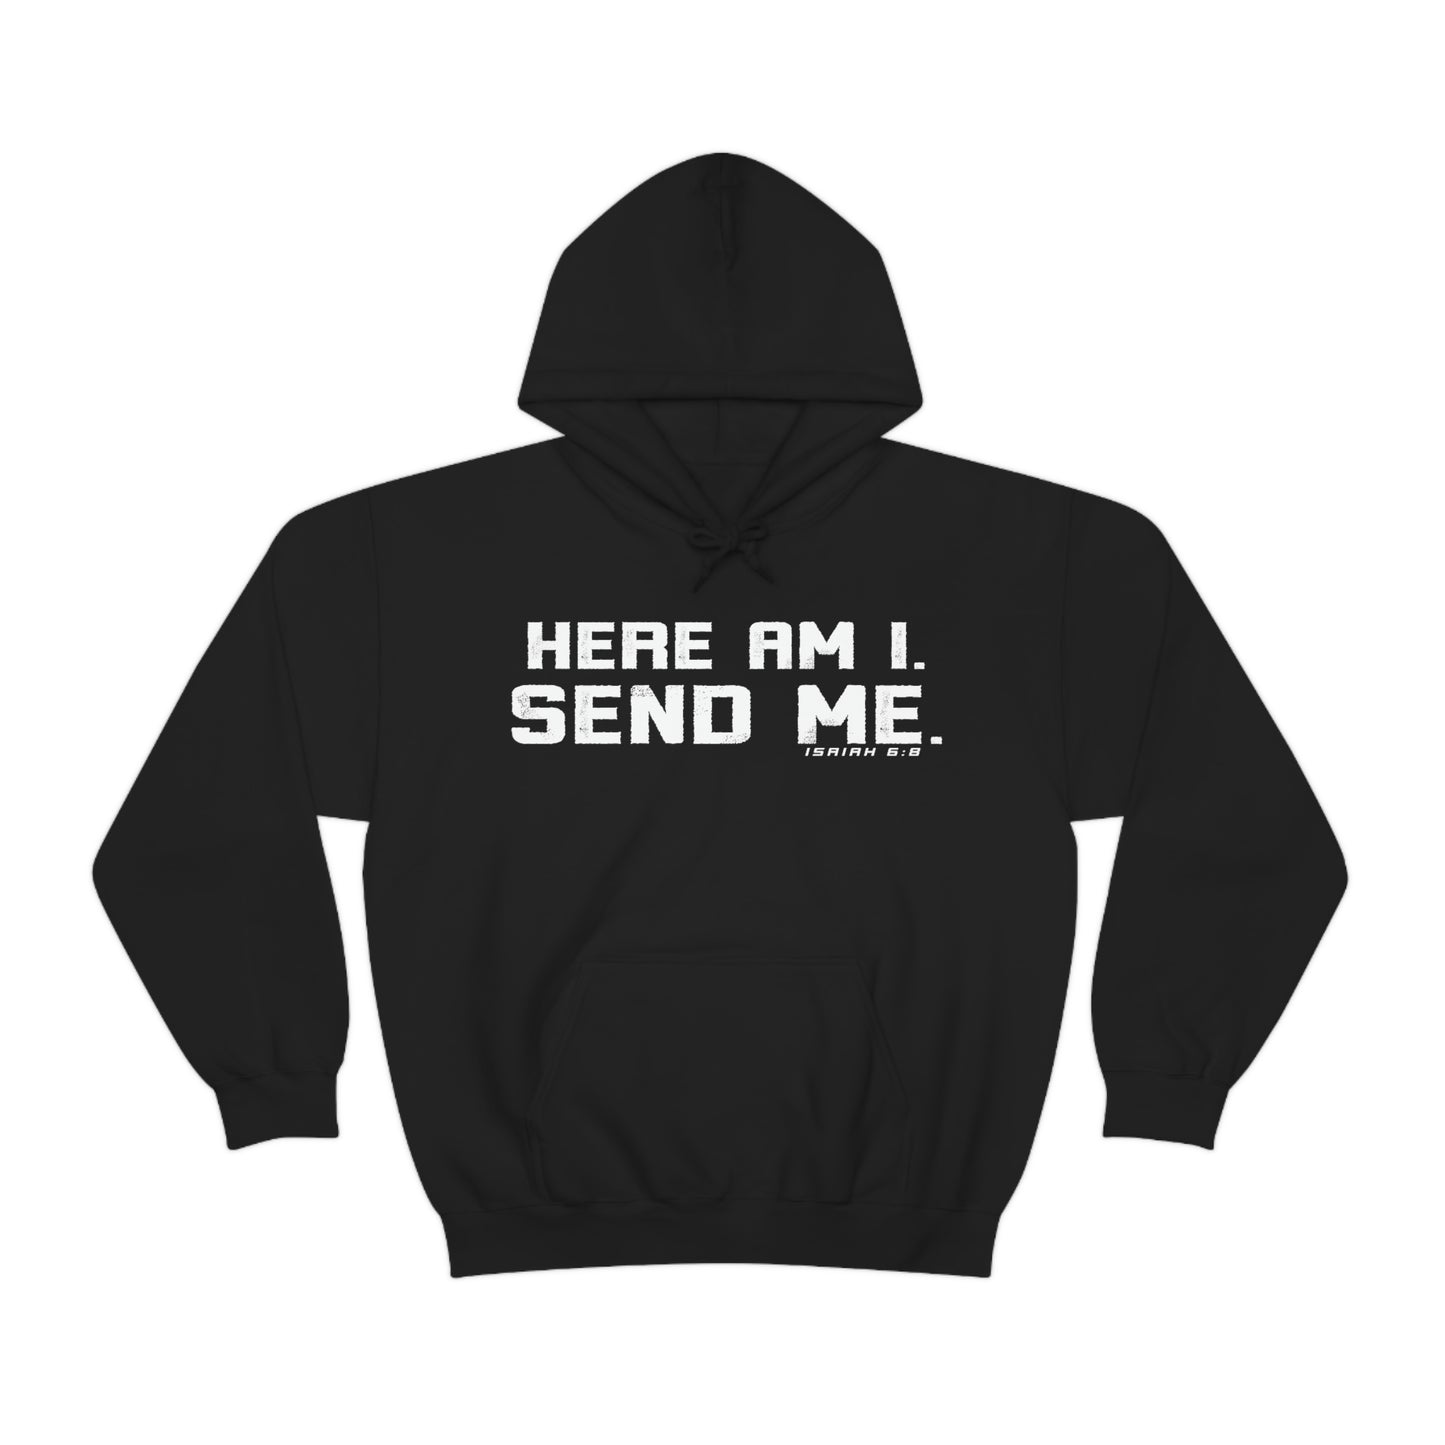 Christian Bible Verse, Isaiah 6:8 printed on black hoodie with bold white font